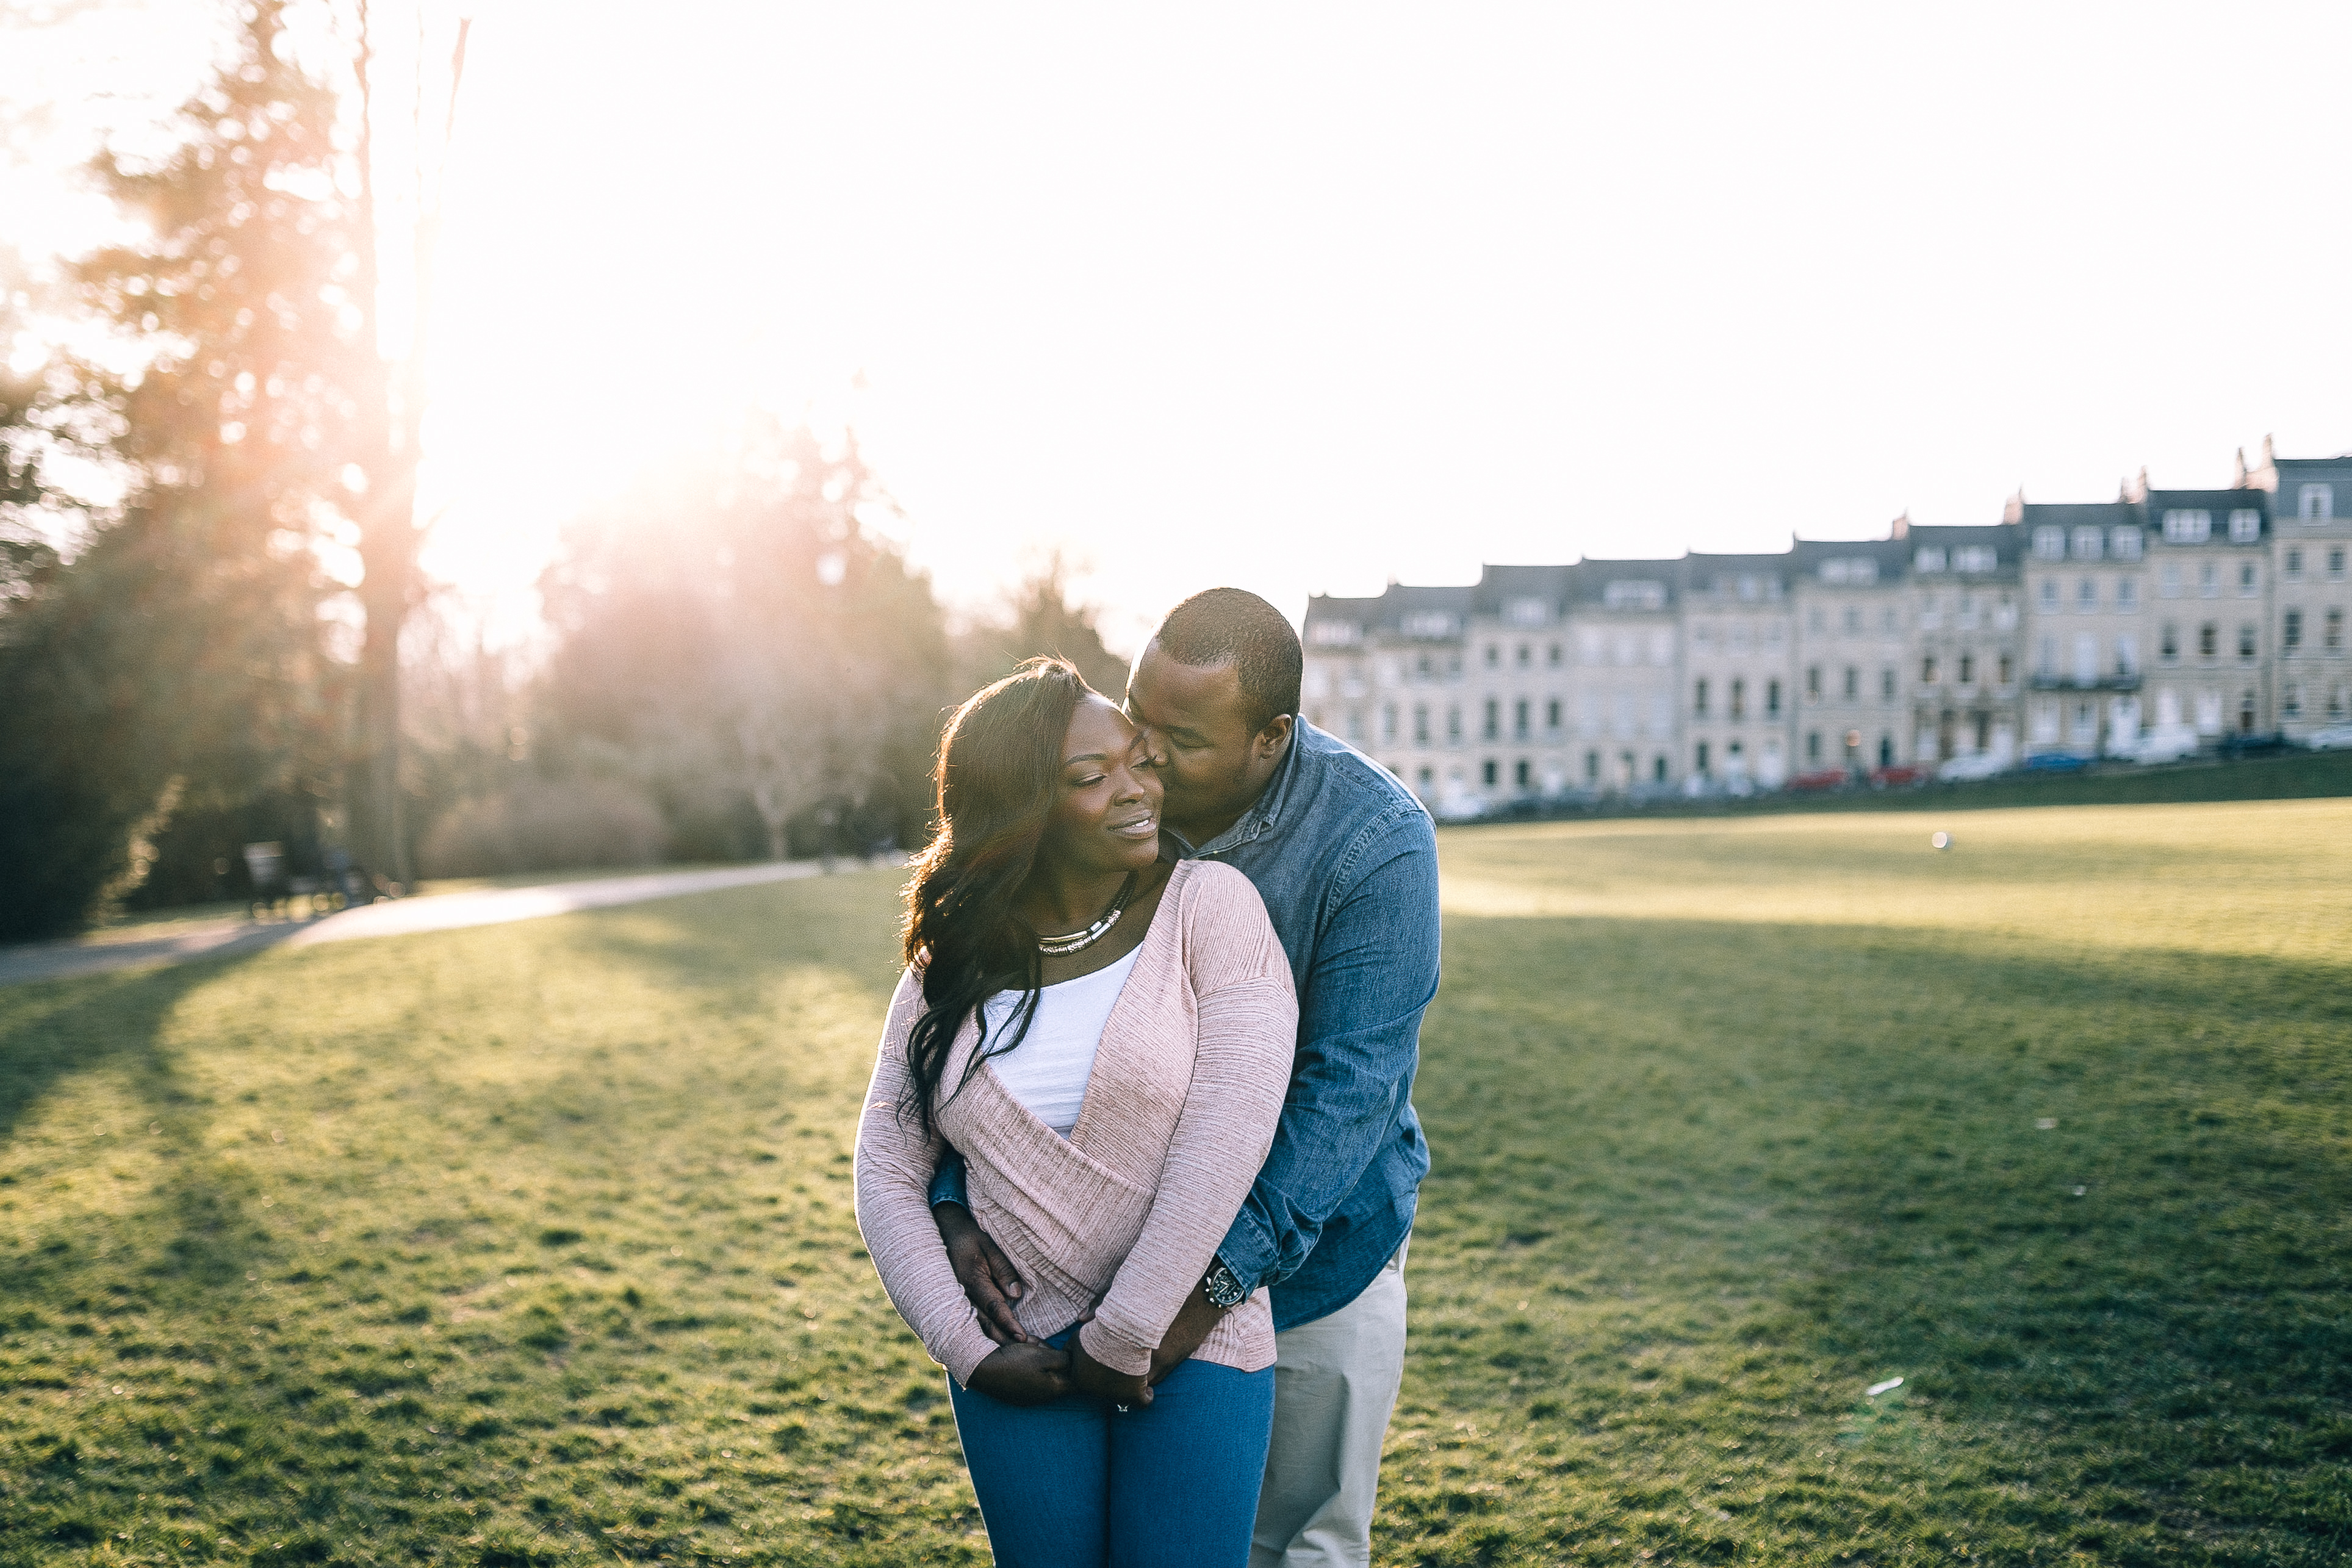 fun and relaxed engagement shoot at victoria park in bath uk by somerset wedding photographer beatrici